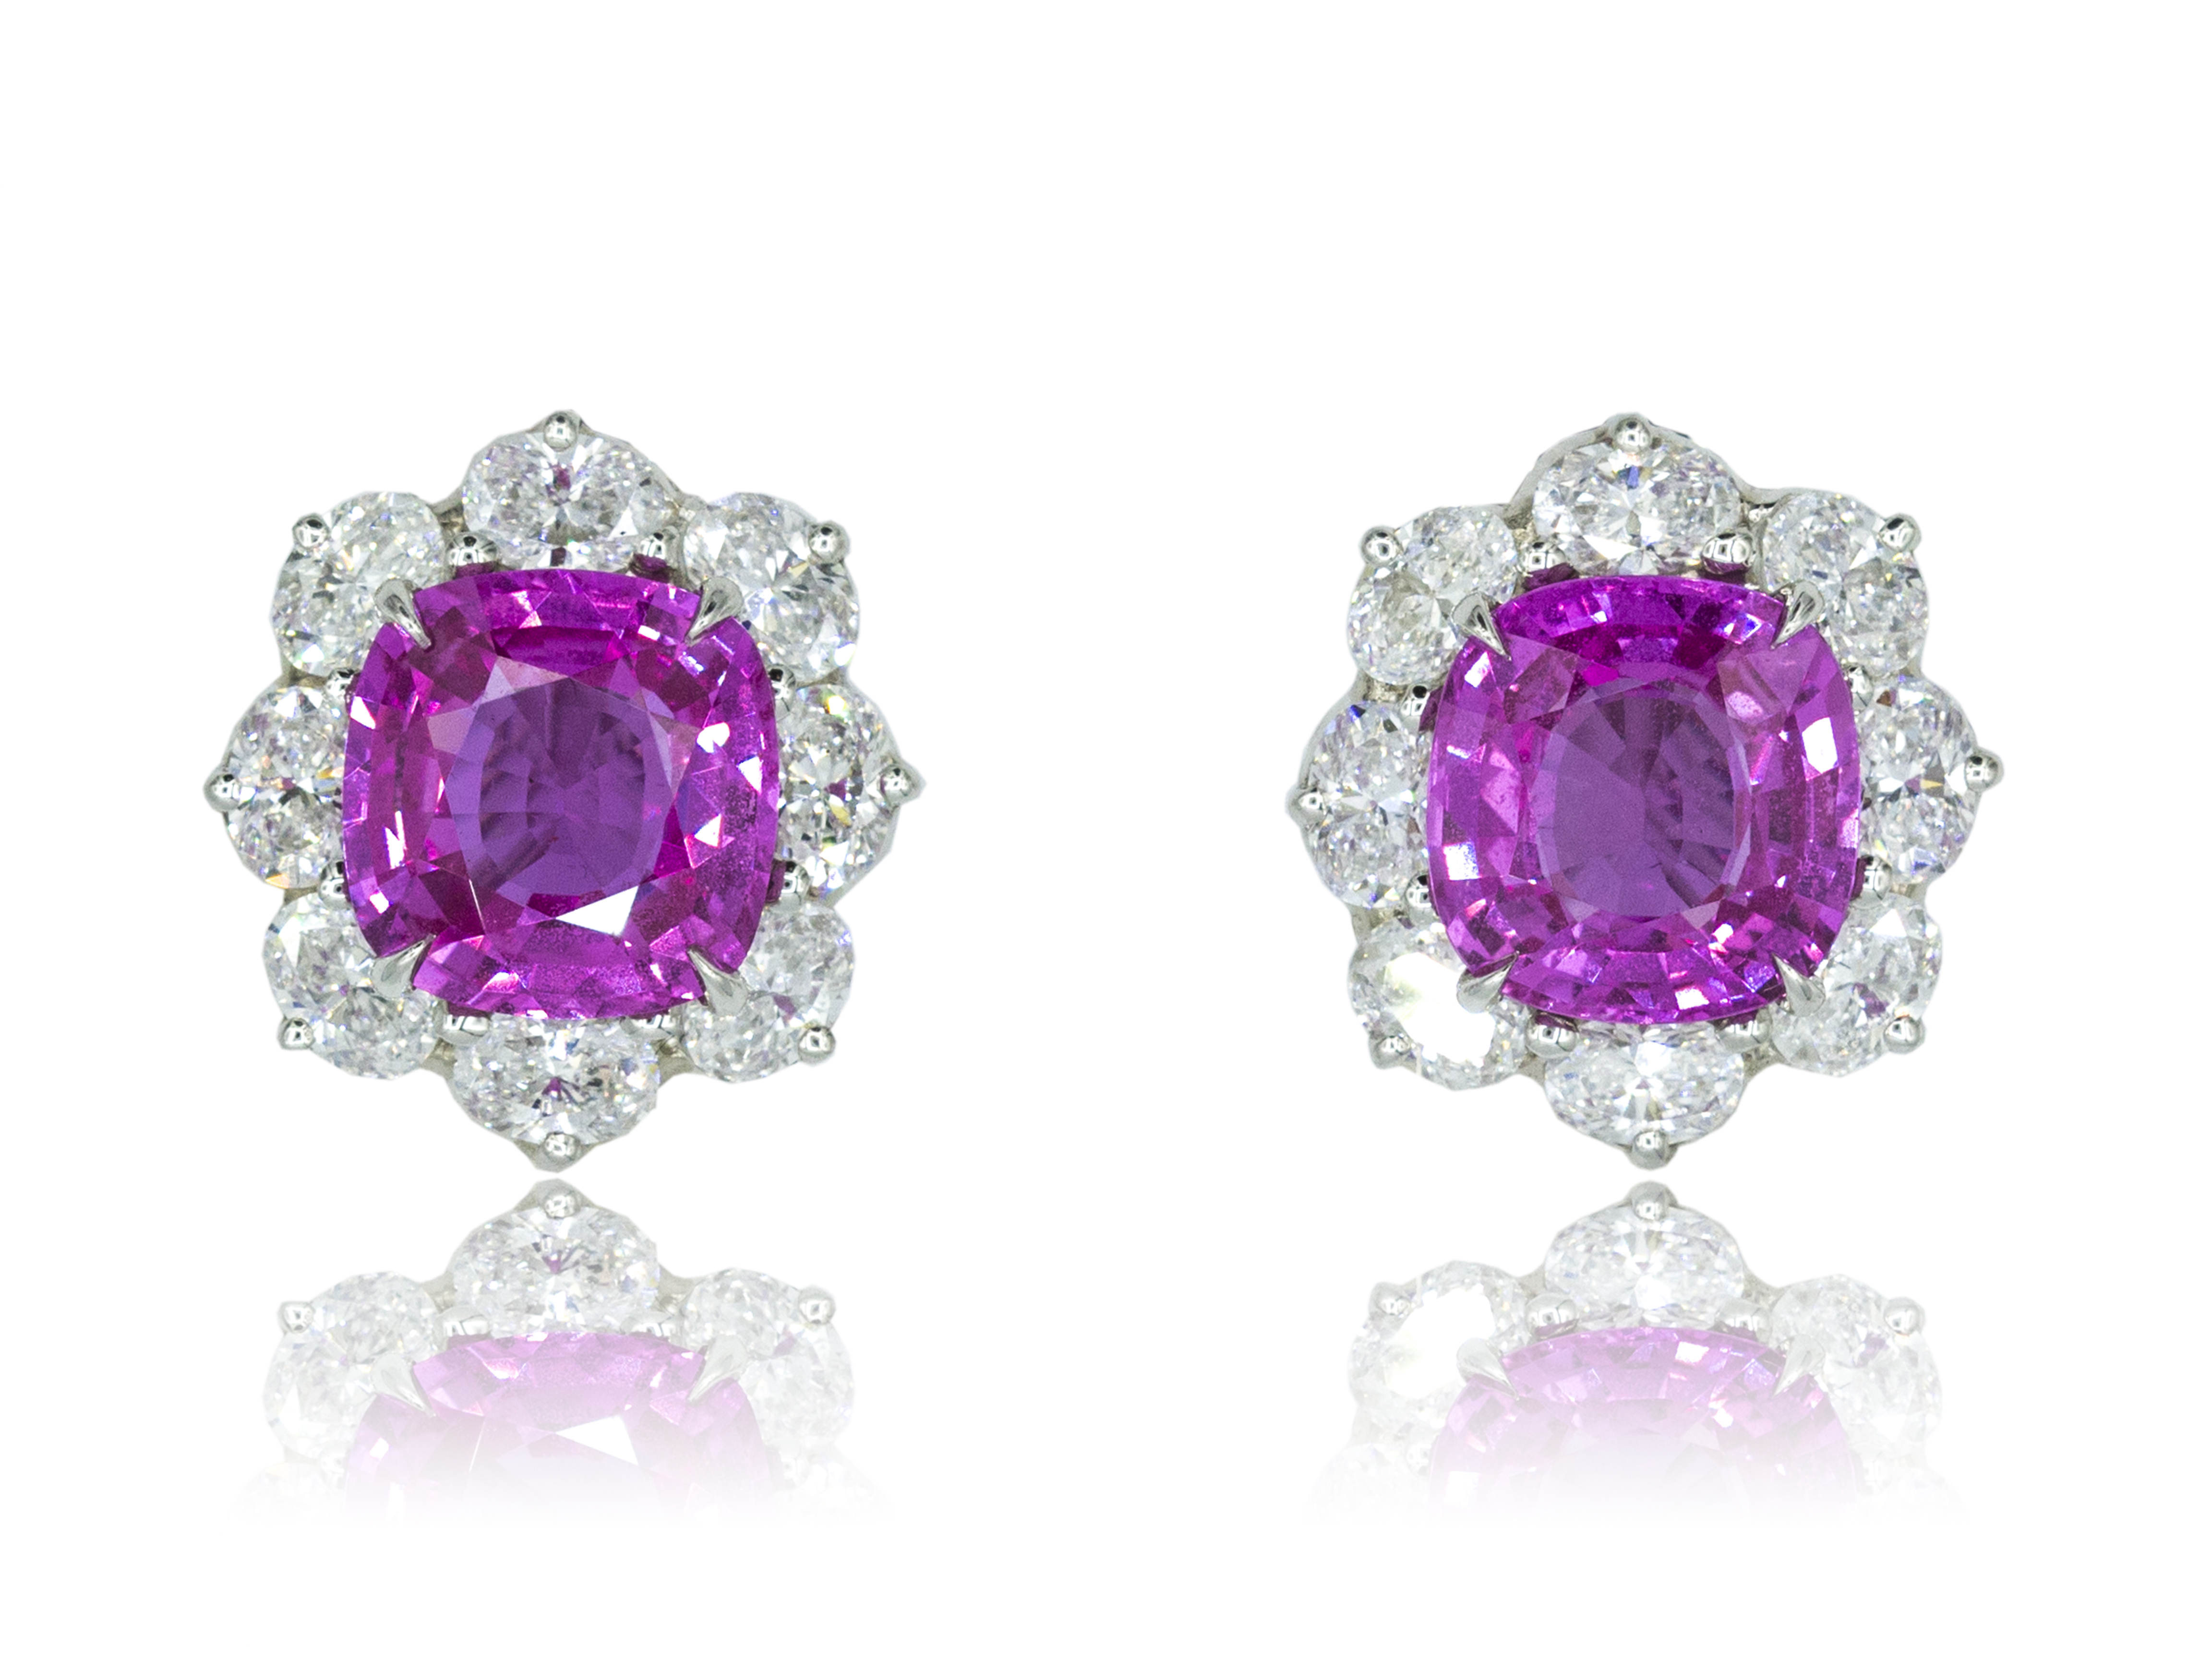 Floral pink sapphire and diamond earrings